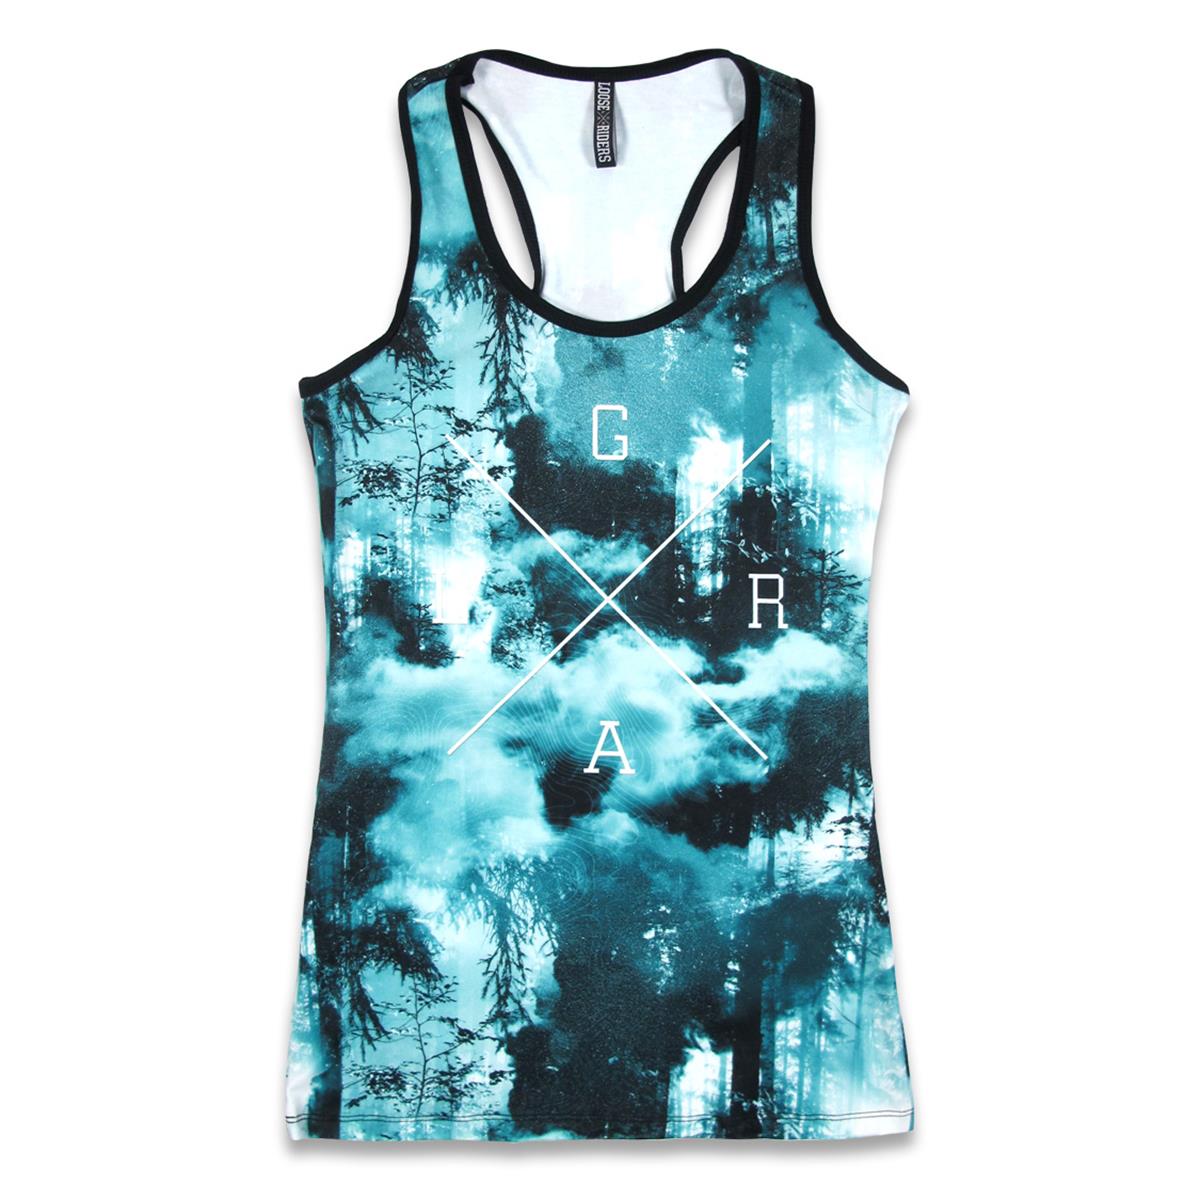 Loose Riders Girls Tank Top  Forest Teal - Black/Green